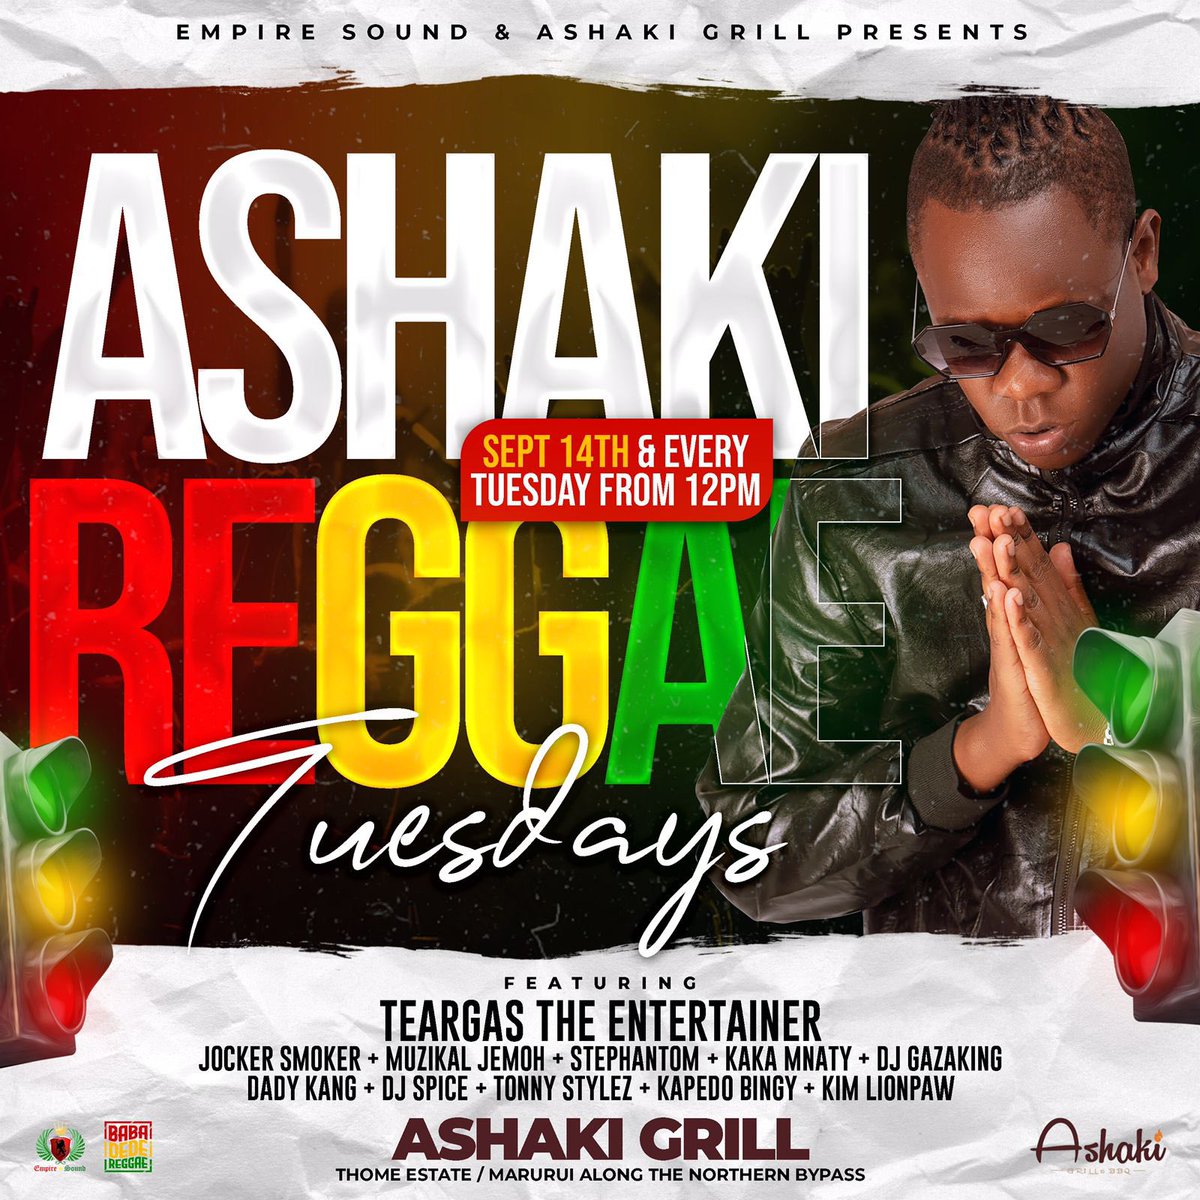 Leo tuko @_ashakigrill THOME along the Northern ByPass #AshakiReggaeTuesdays see you there